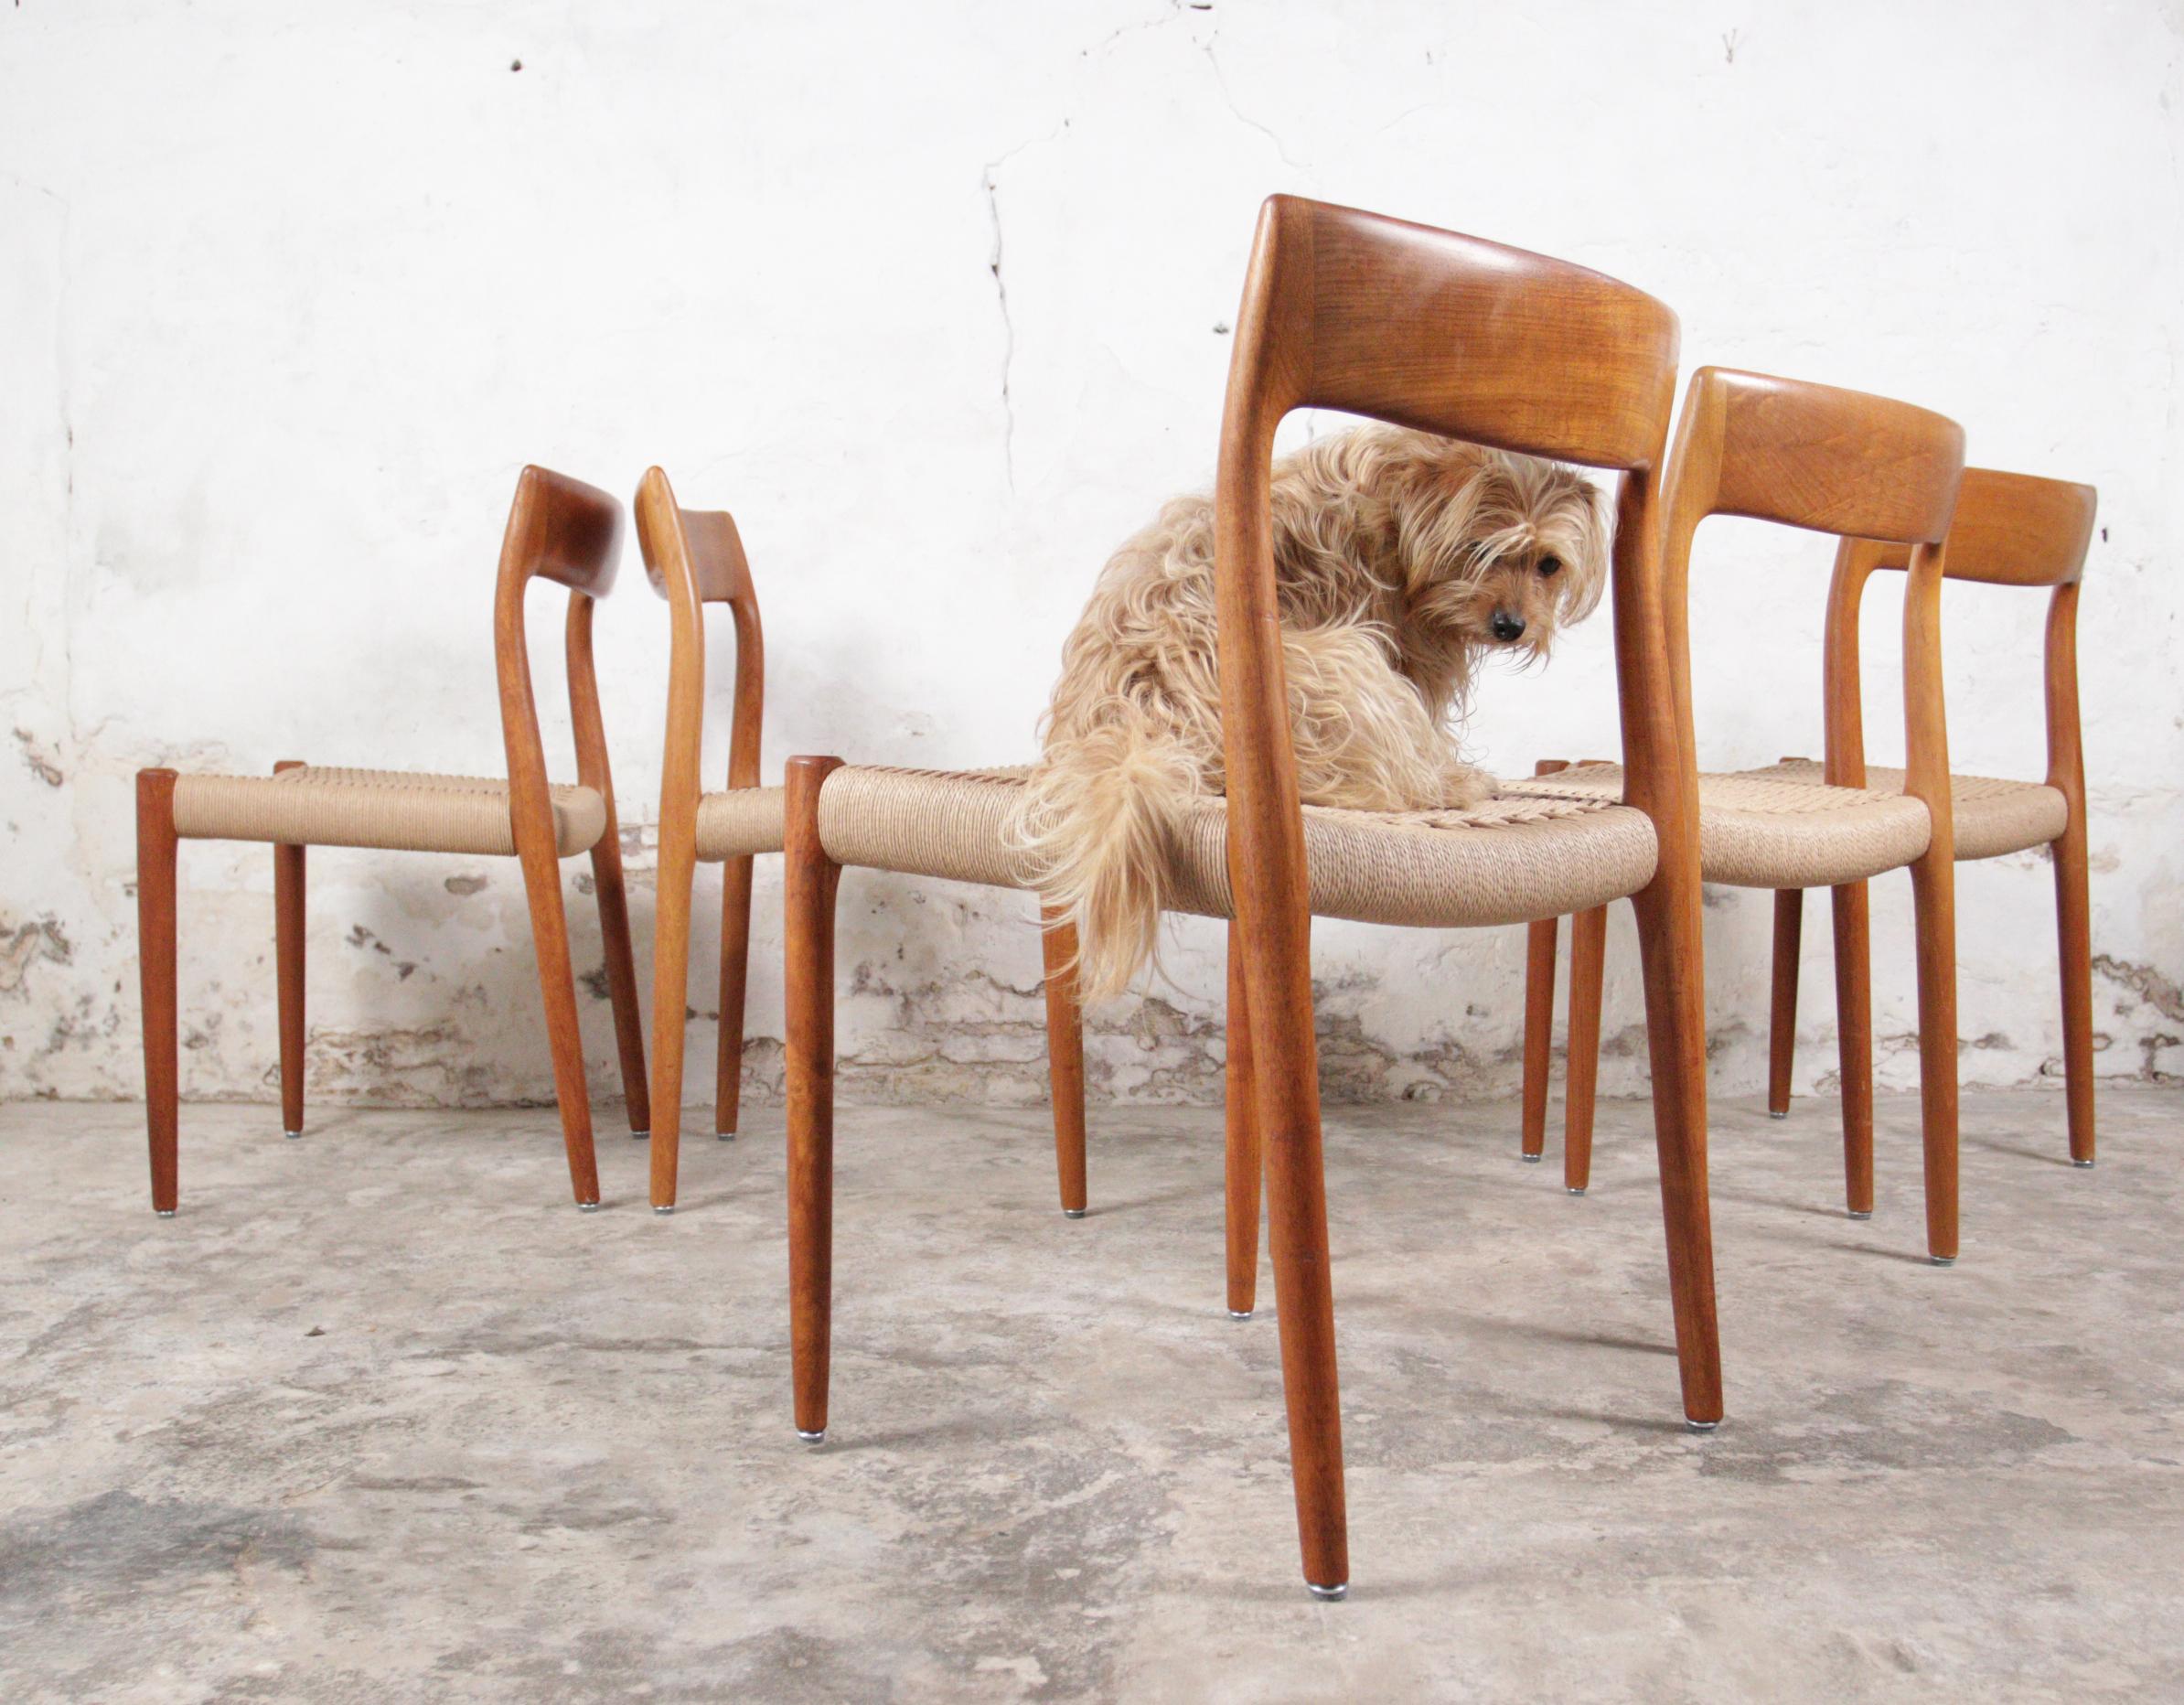 10 Beautiful, fully restored, Model 77 chairs designed by the Danish designer Niels Otto Møller, and manufactured by JL Møllers Møbelfabrik in the 1960s
The frames are made of solid teak and the seat has been re-fitted with paper cord.
Timeless